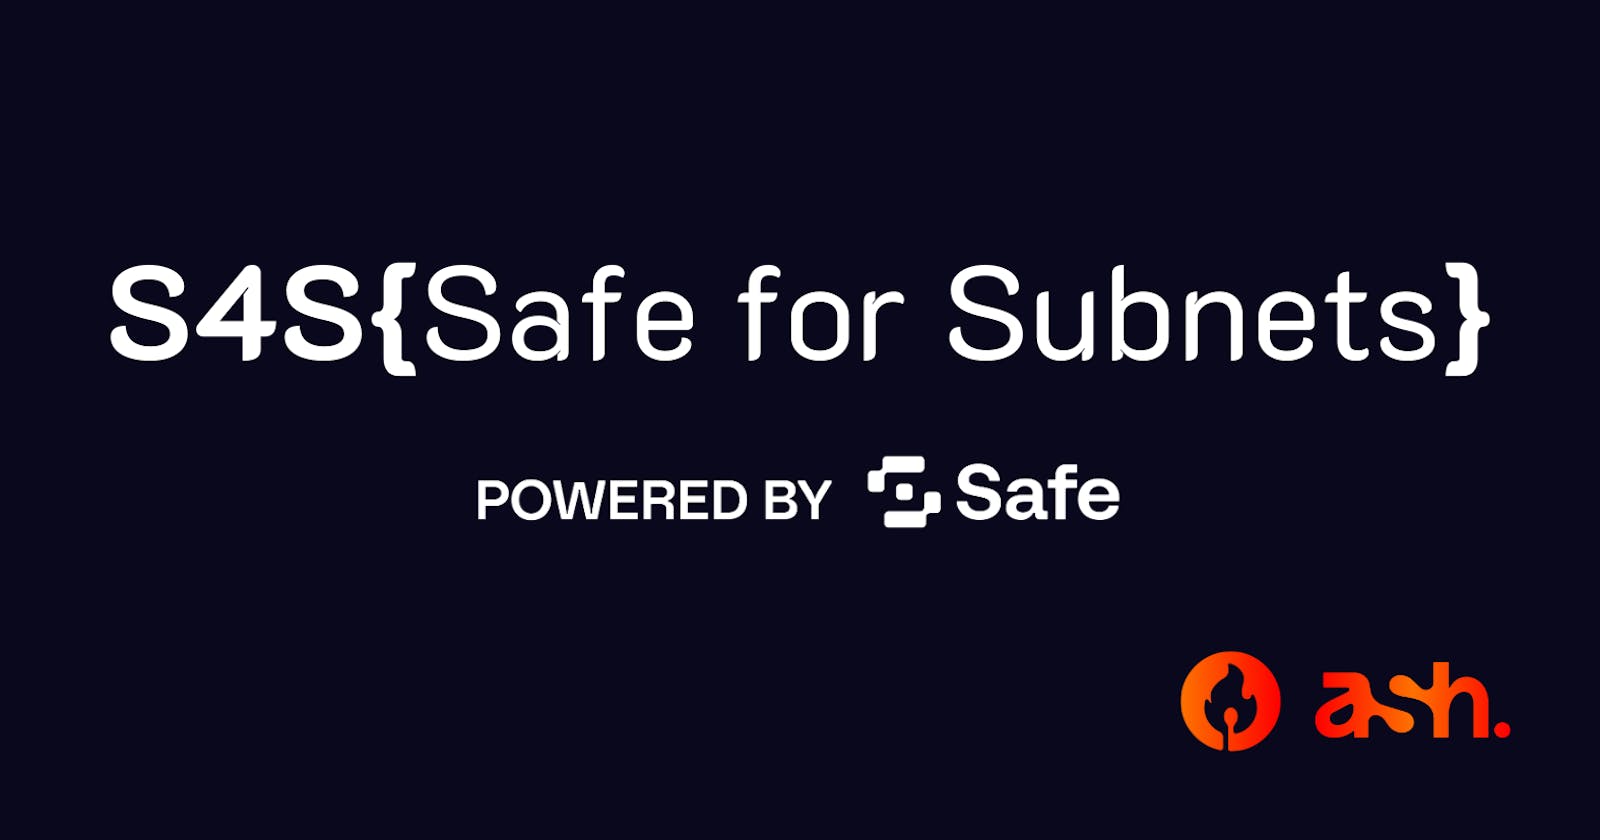 Announcing S4S: Safe for Subnets hosted by Ash